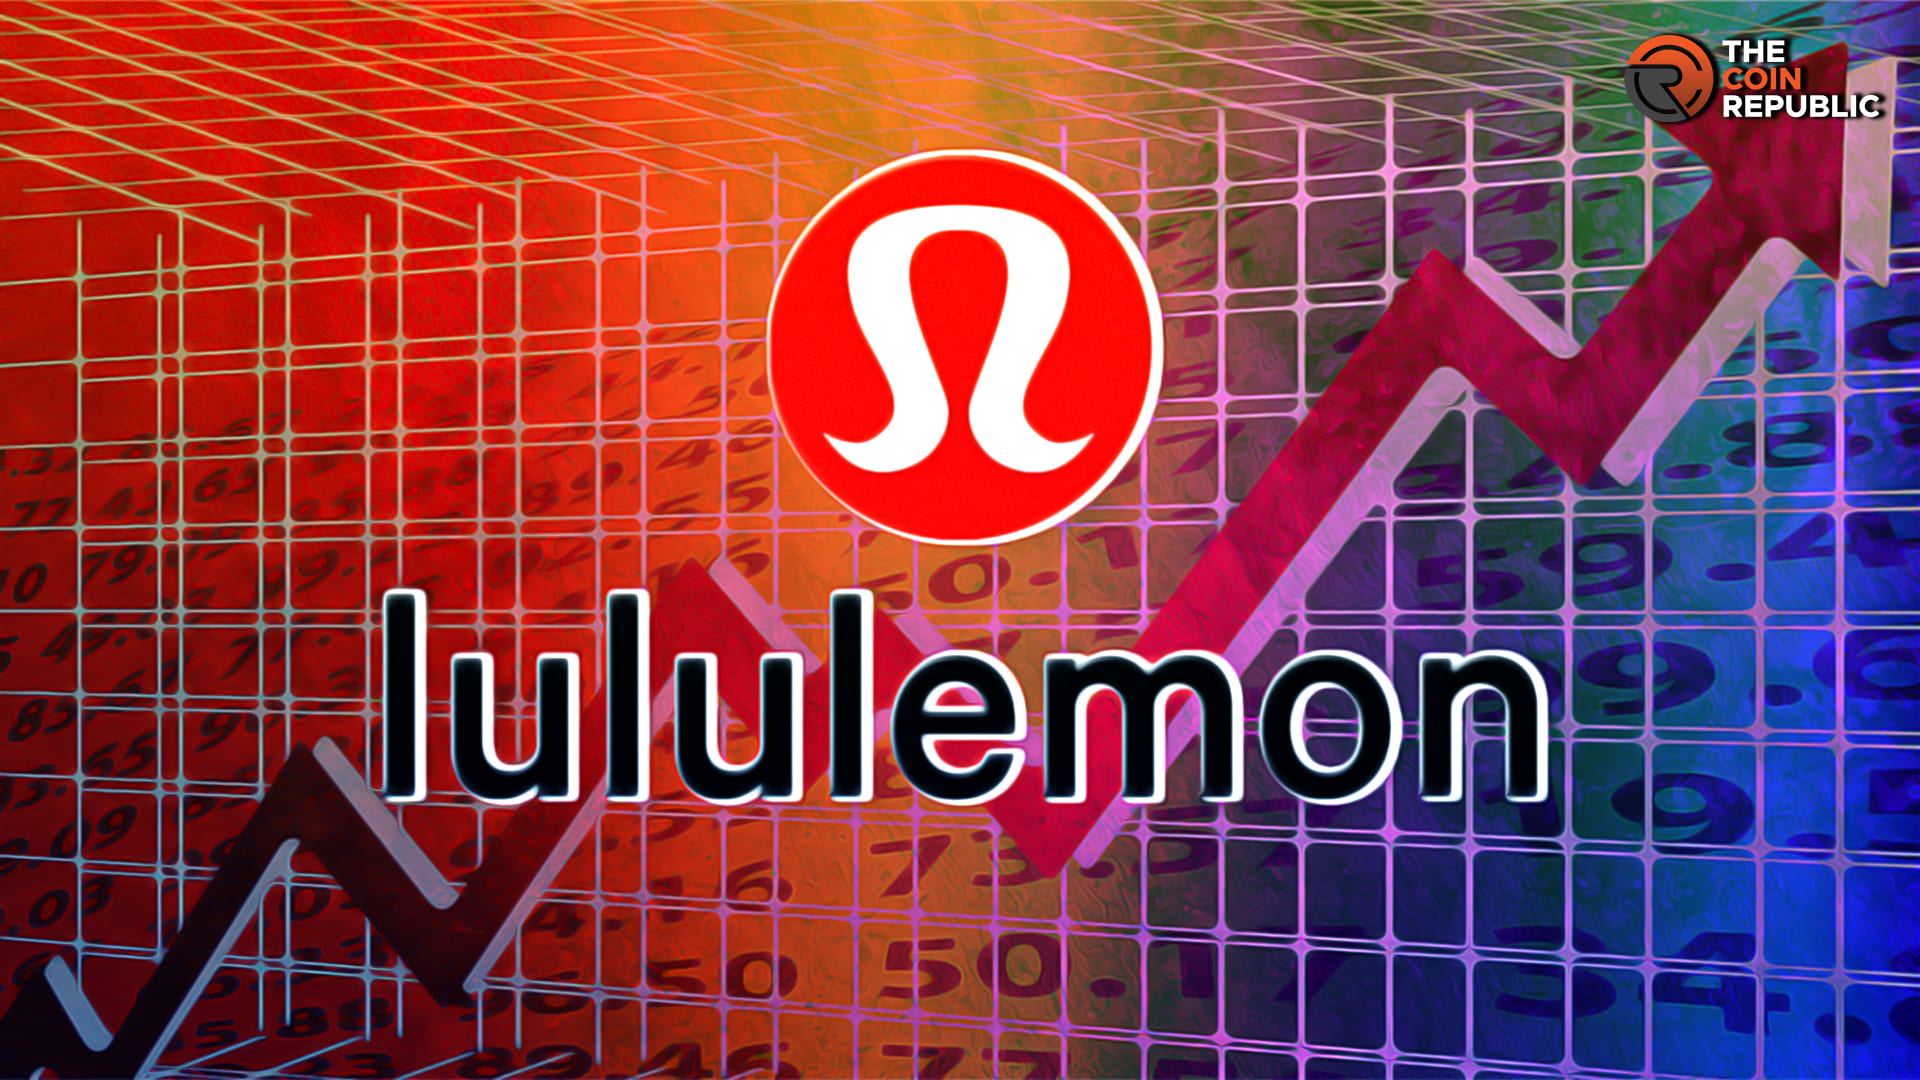 Is Lululemon Athletica Stock A Buy Or Sell? Analysis Of Valuation